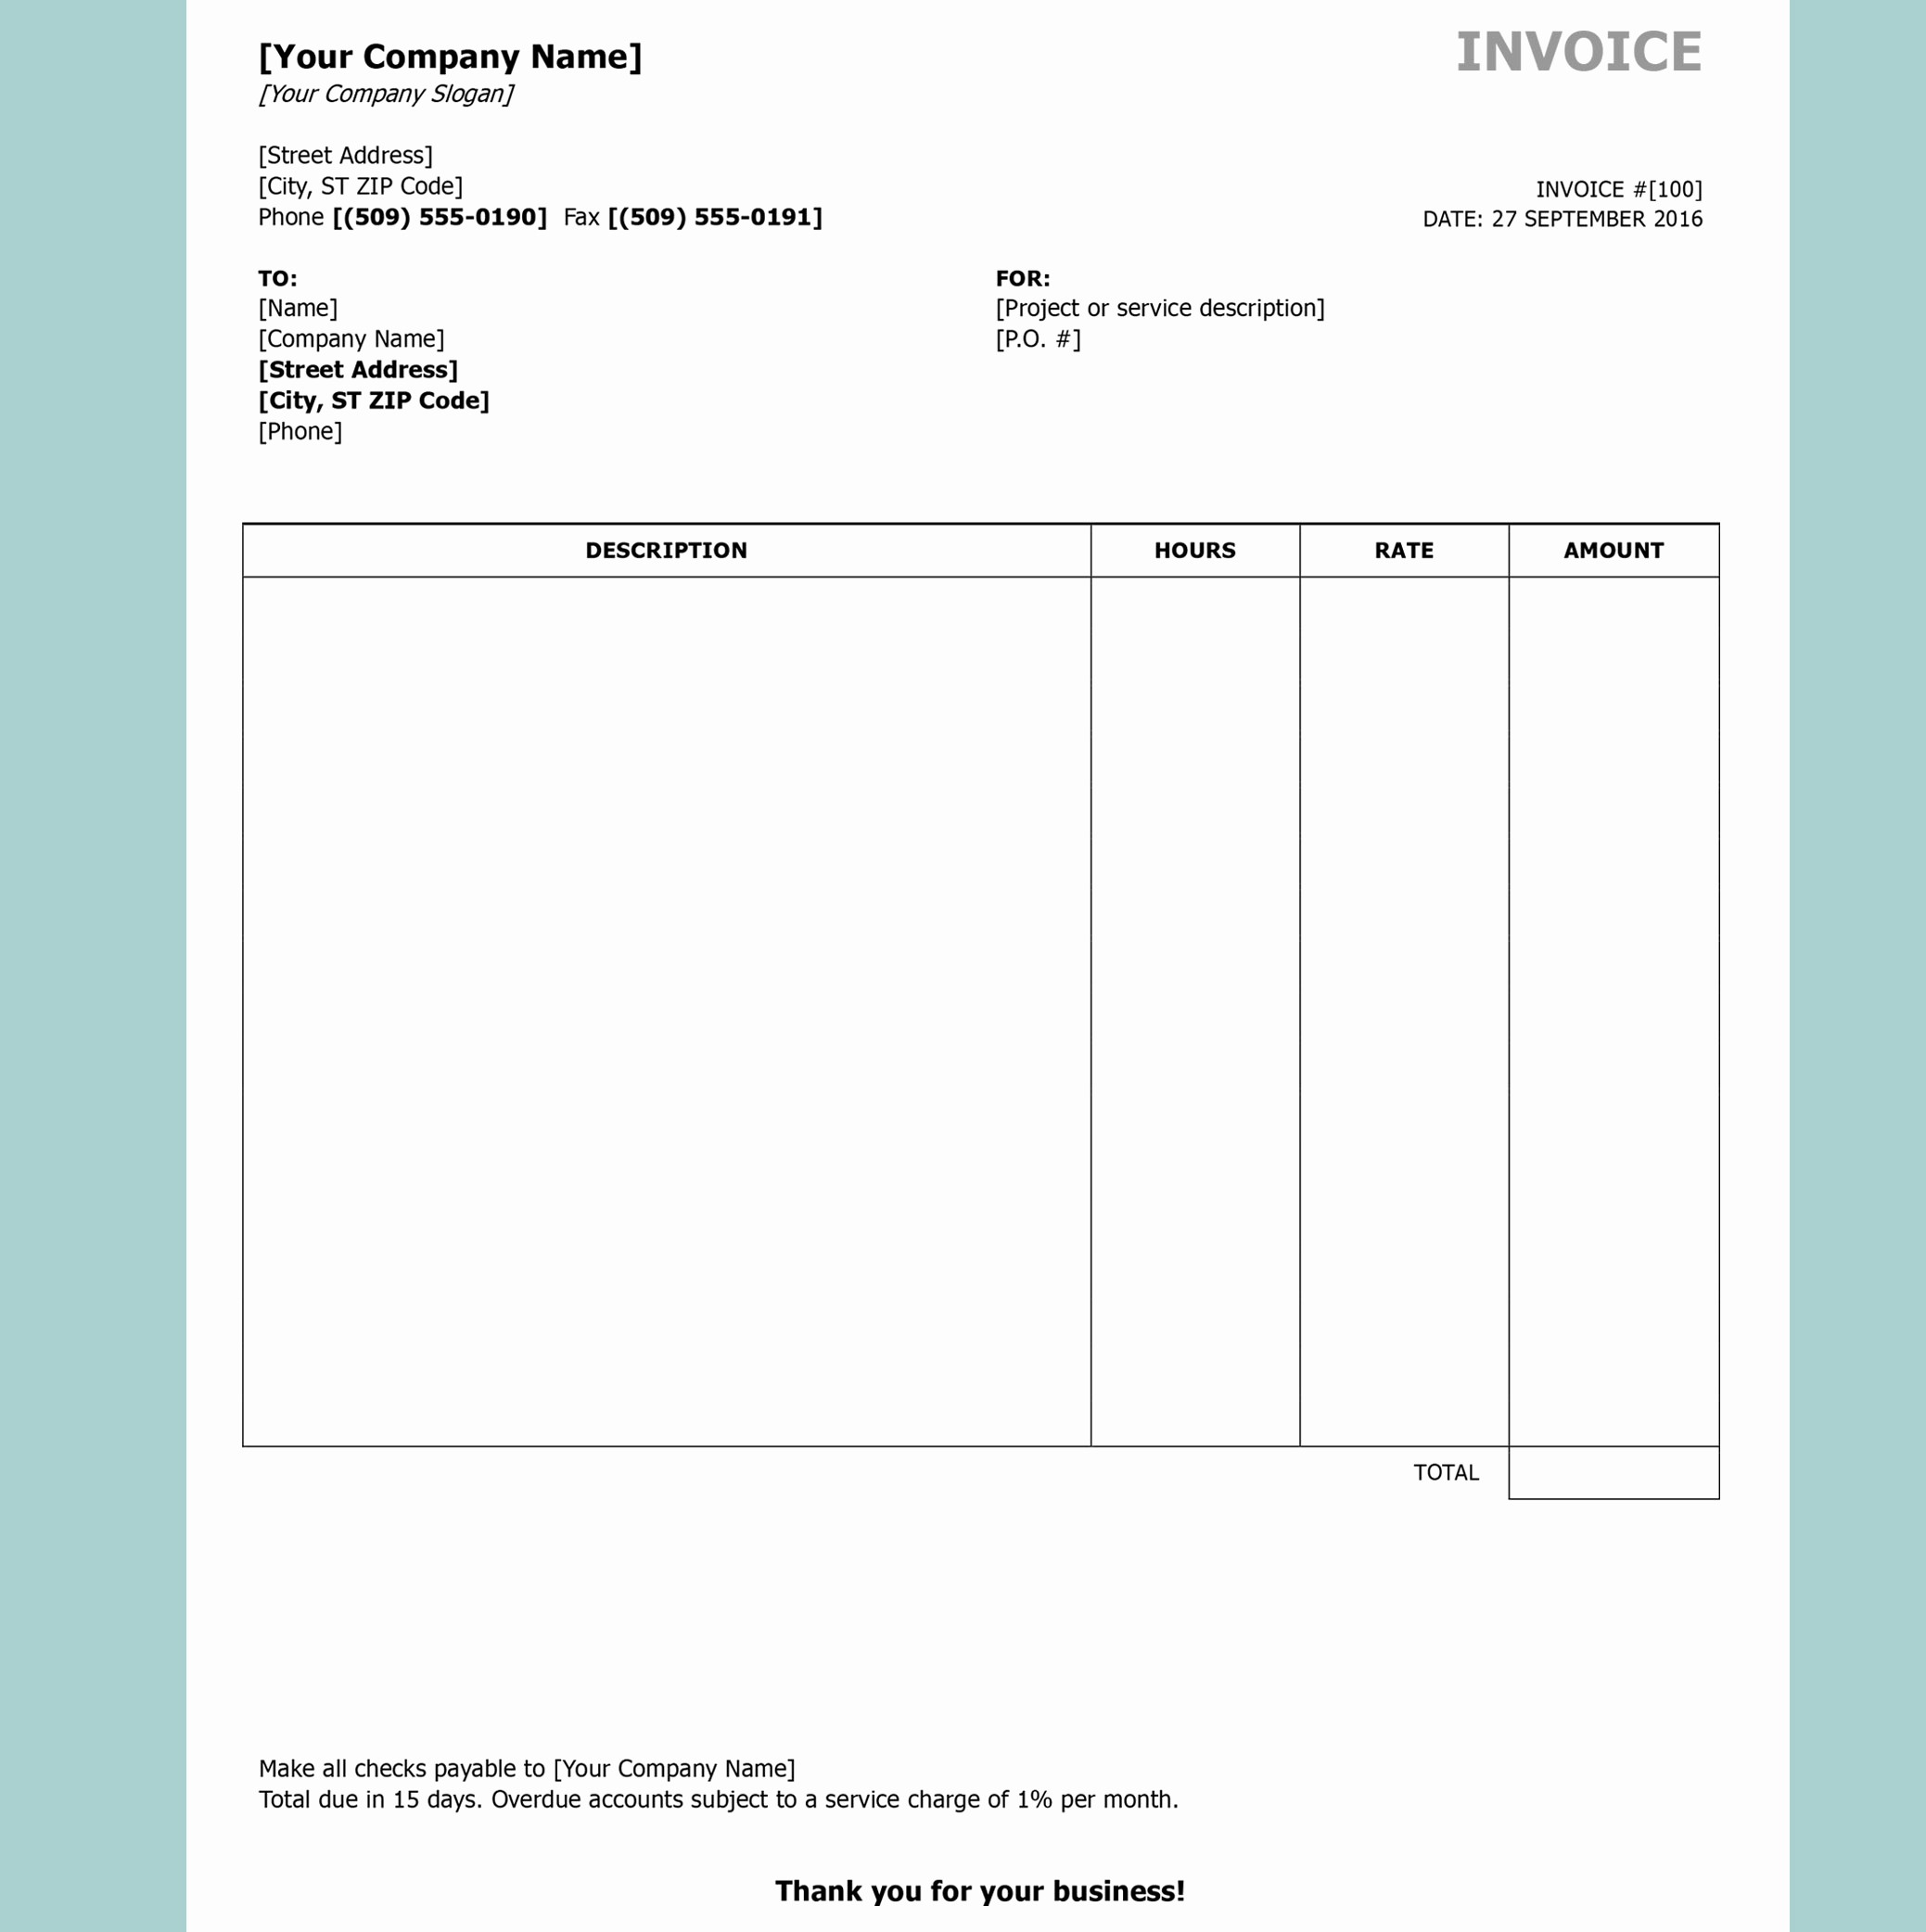 Free Printable Invoice Templates Word Best Of Free Invoice Templates by Invoiceberry the Grid System